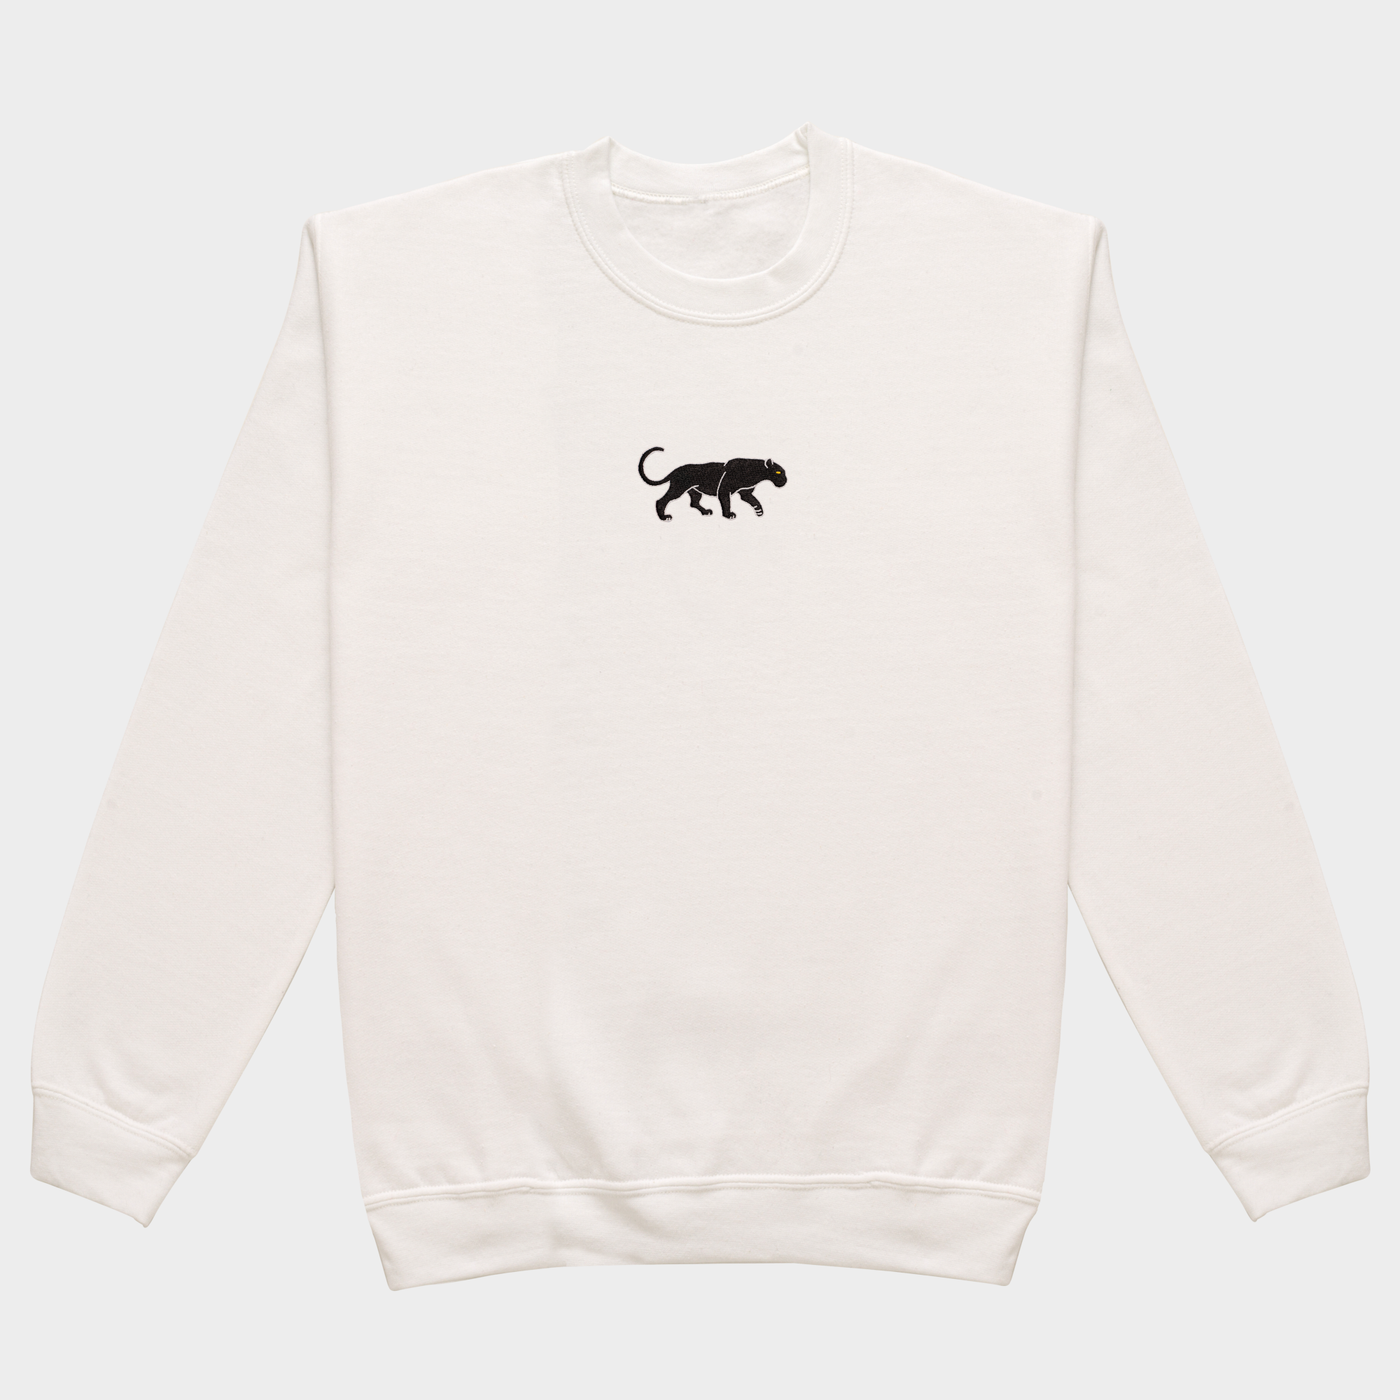 Bobby's Planet Women's Embroidered Black Jaguar Sweatshirt from South American Amazon Animals Collection in White Color#color_white